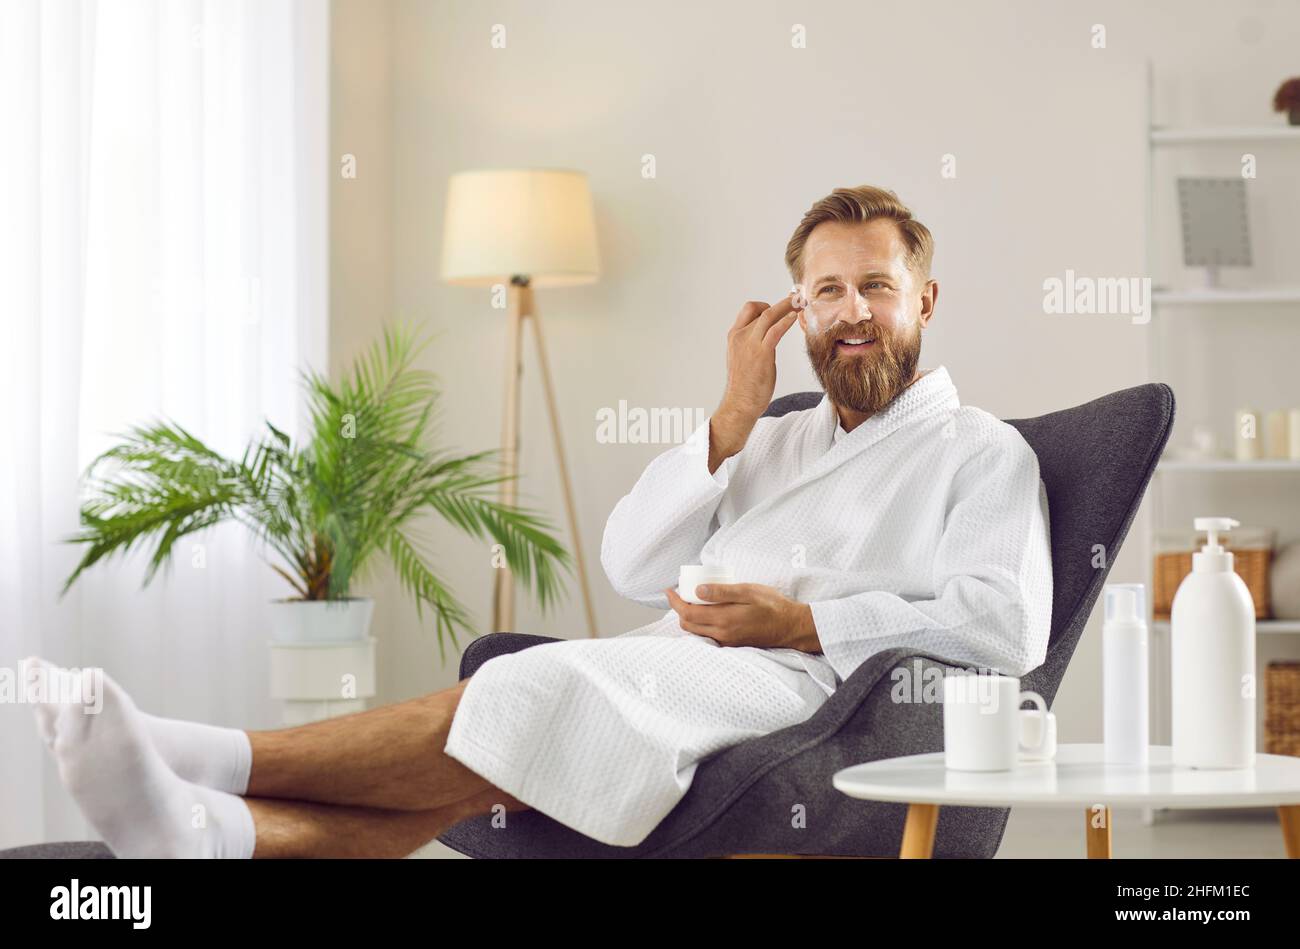 Funny bearded man puts cosmetic mask on his face while doing spa treatments at home. Stock Photo